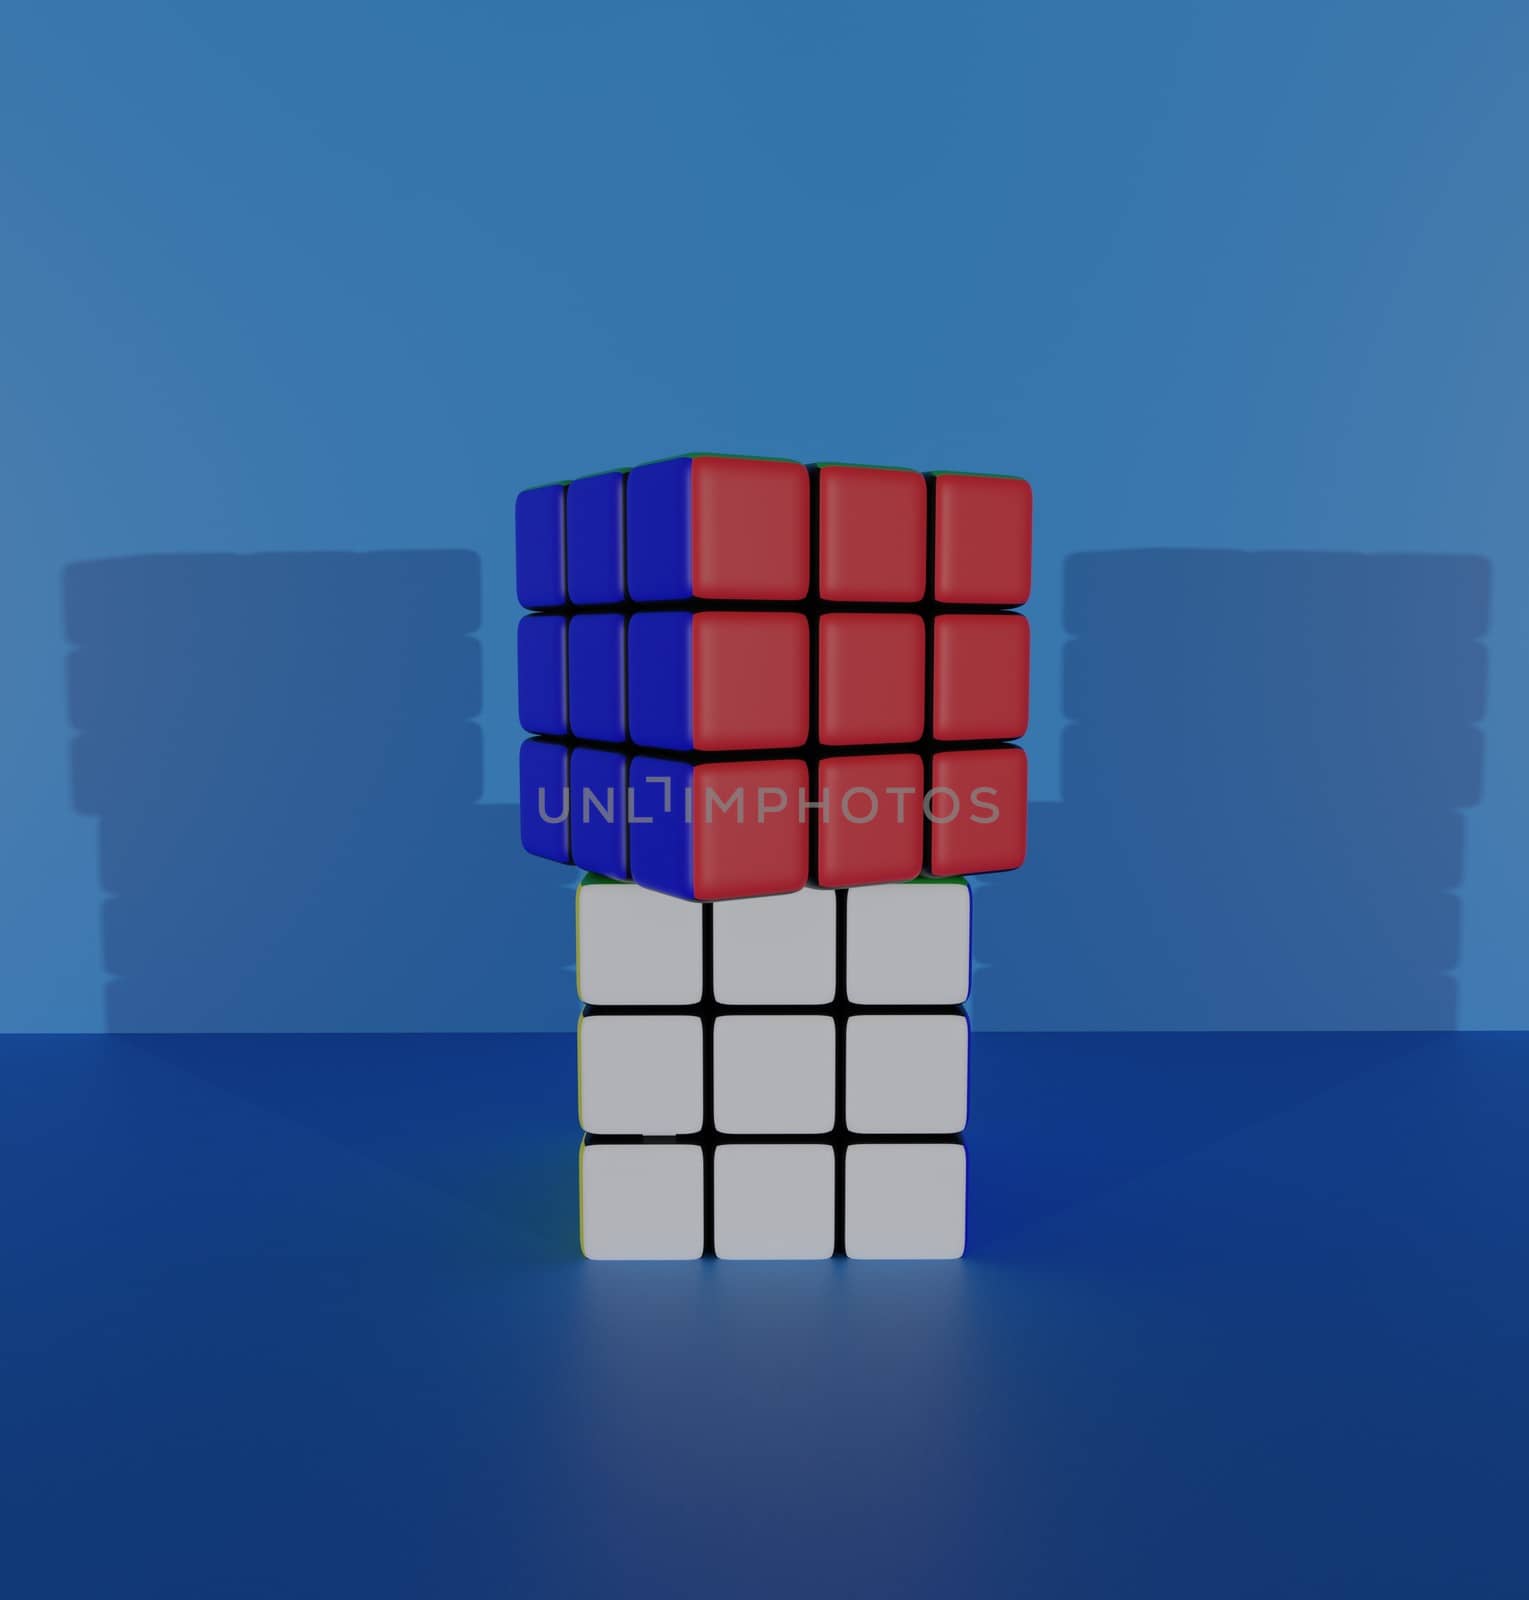 rubik's cube 3d render. Abstraction illustration. puzzle cube